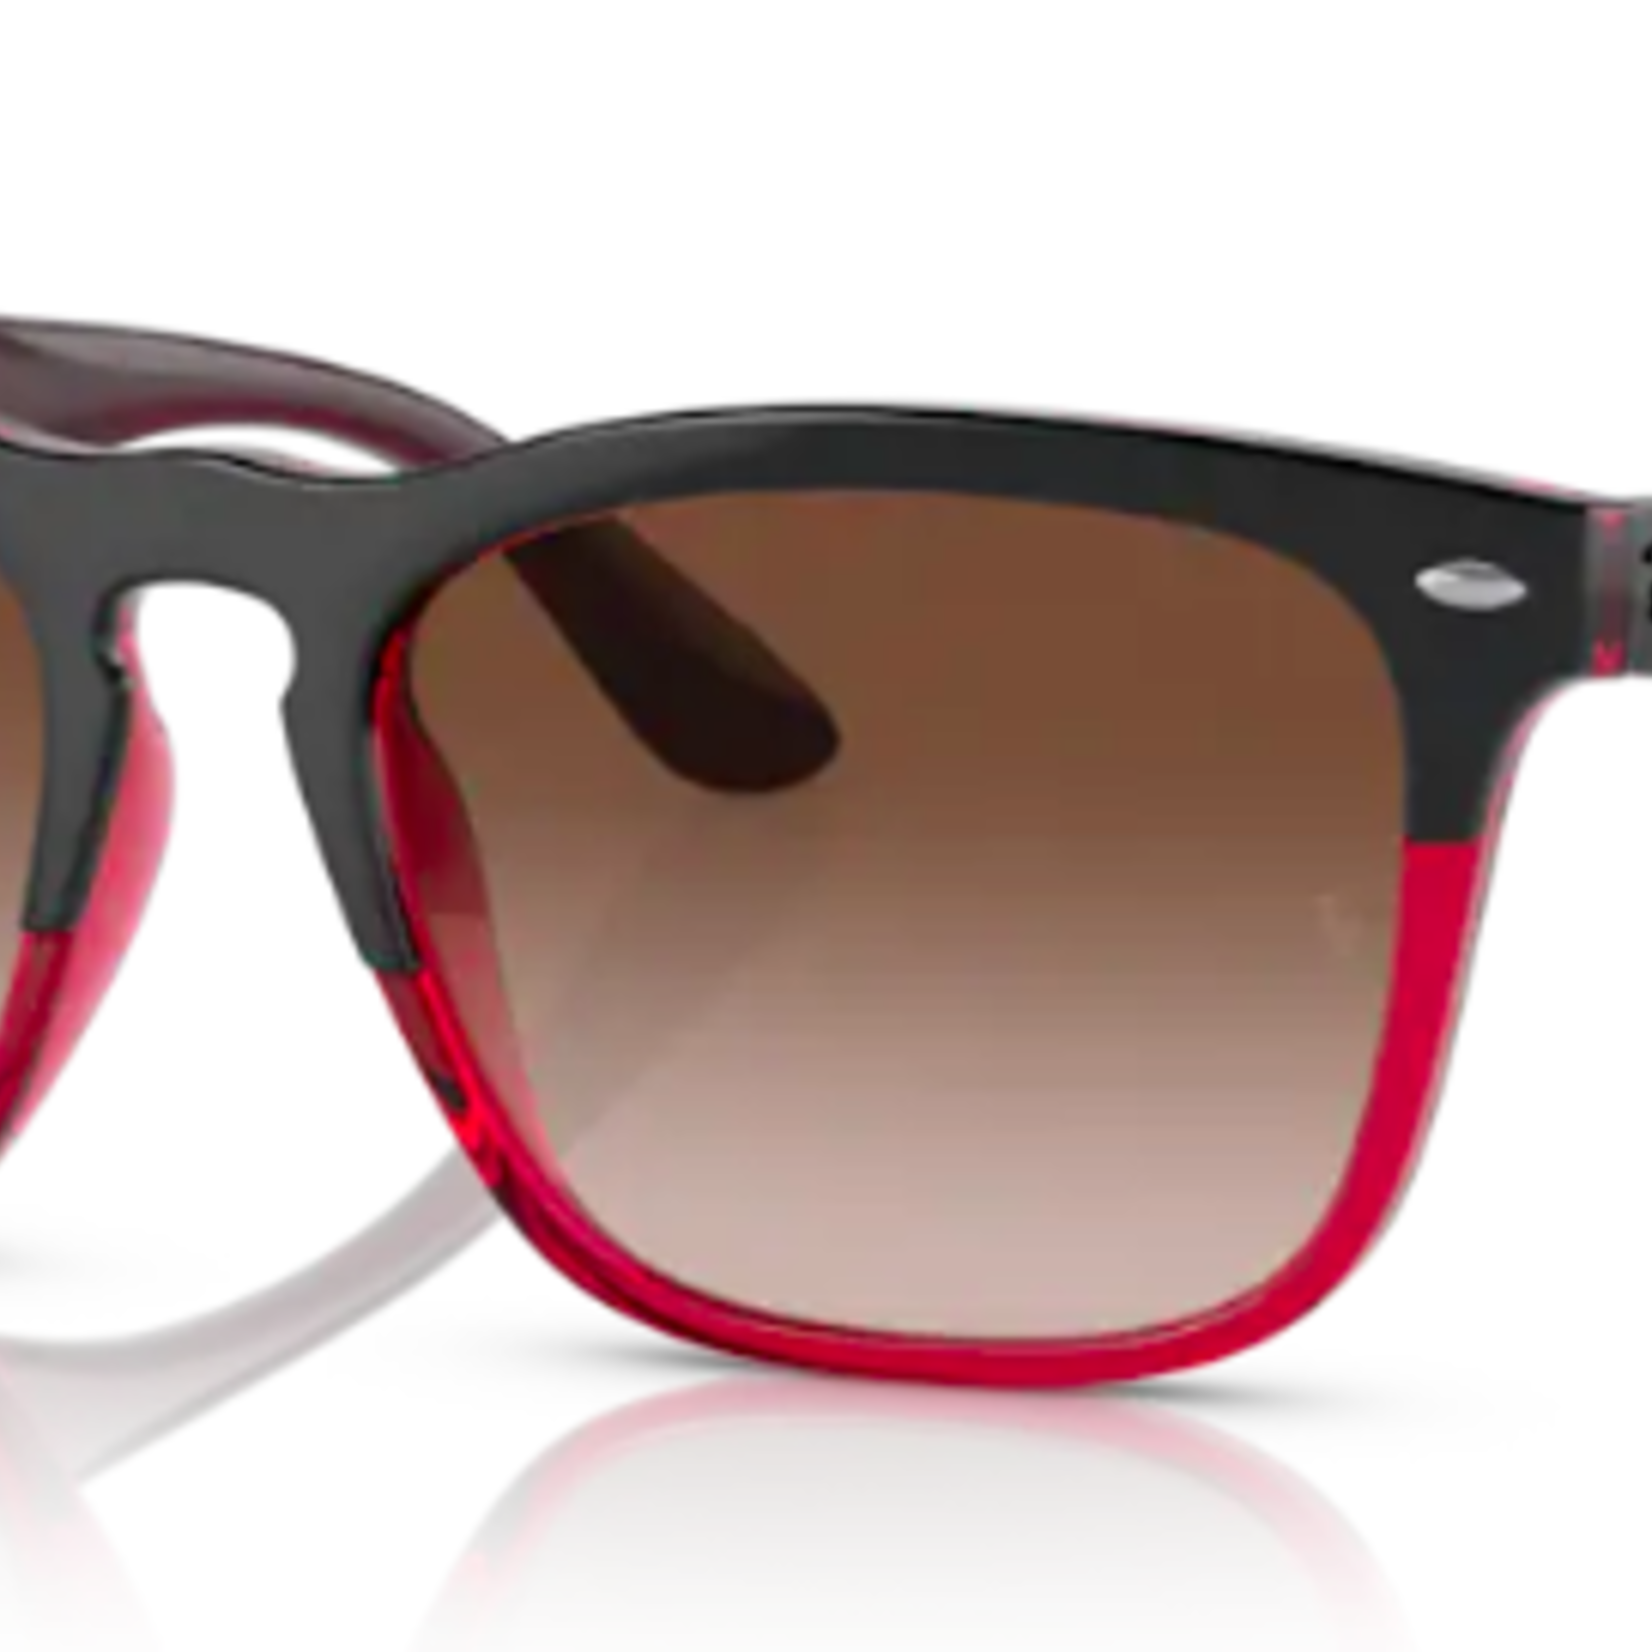 Ray-Ban Ray-Ban Sunglasses, Steve, Gry on Transparent Red, Gradient Brn, 54